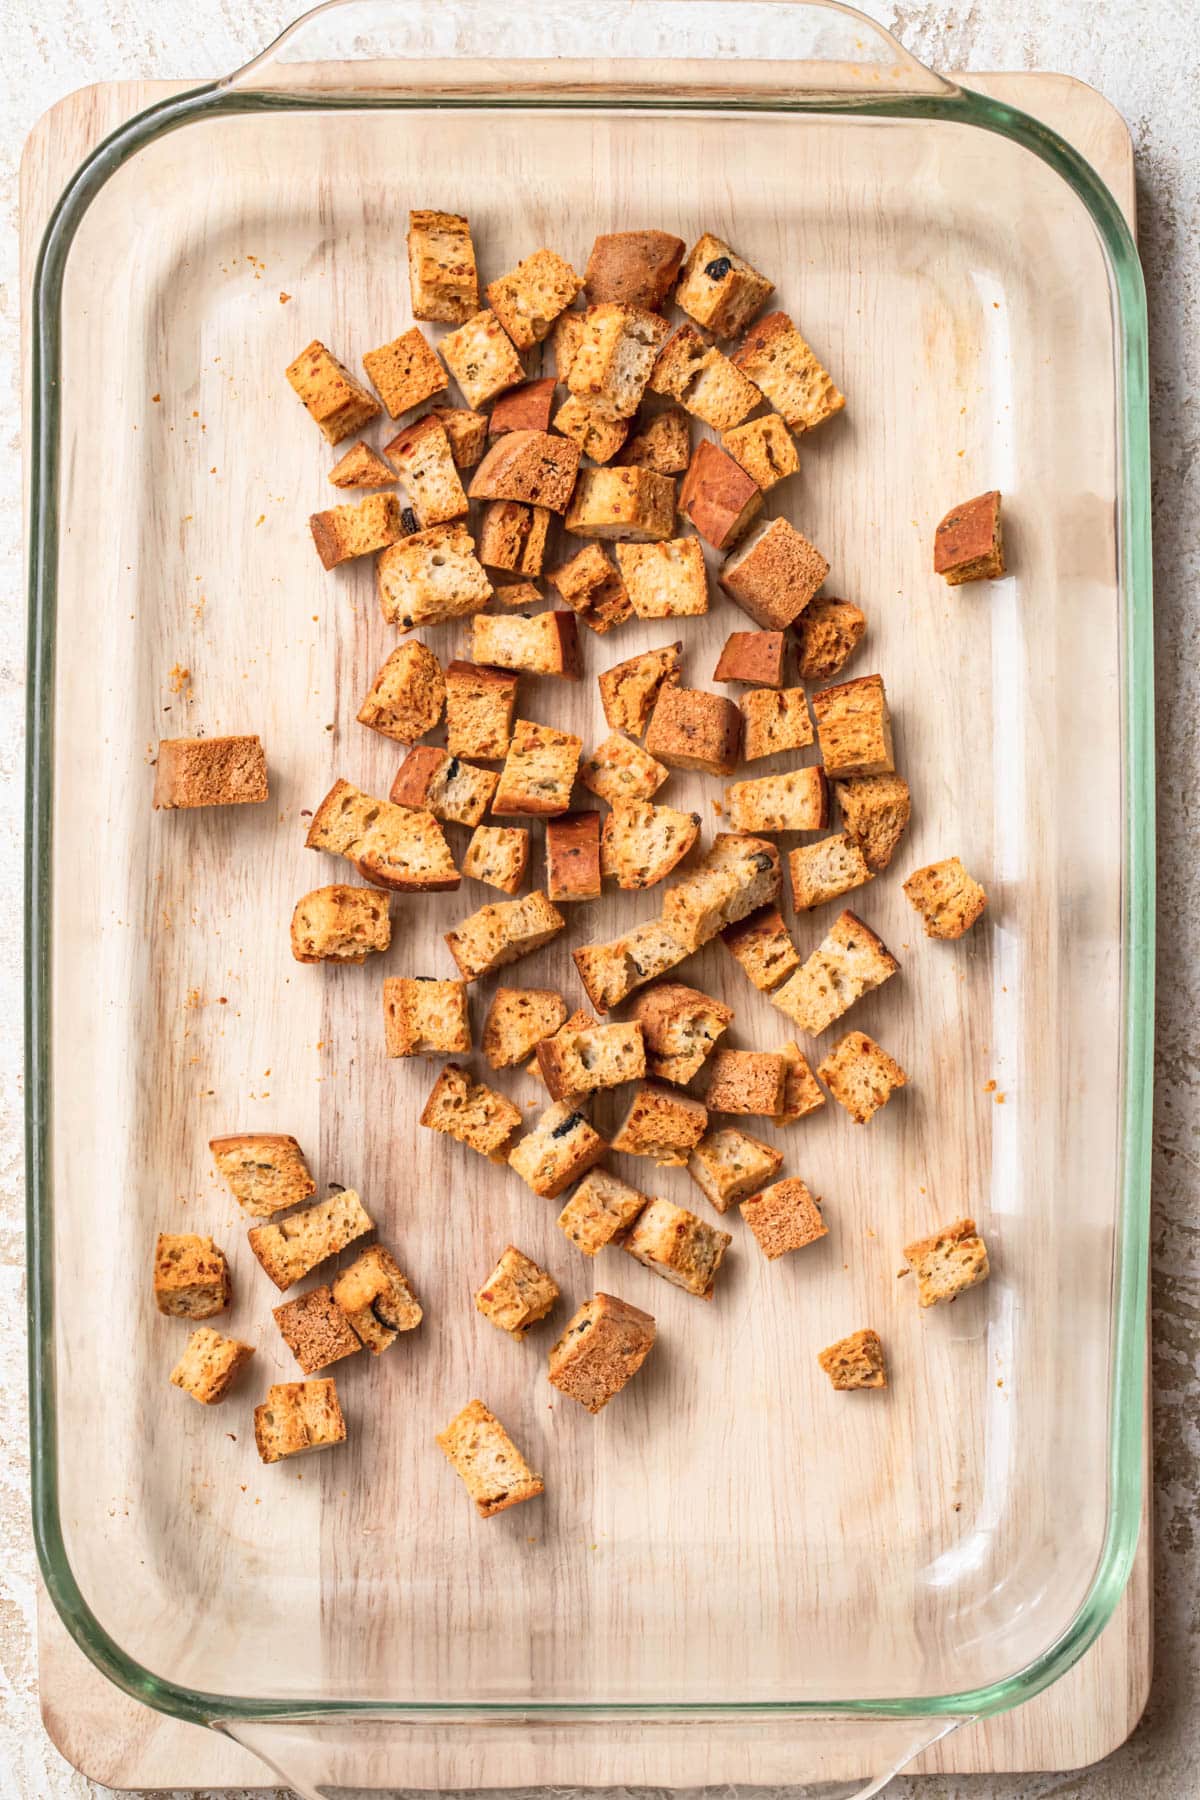 Golden toasted croutons in a glass baking dish.